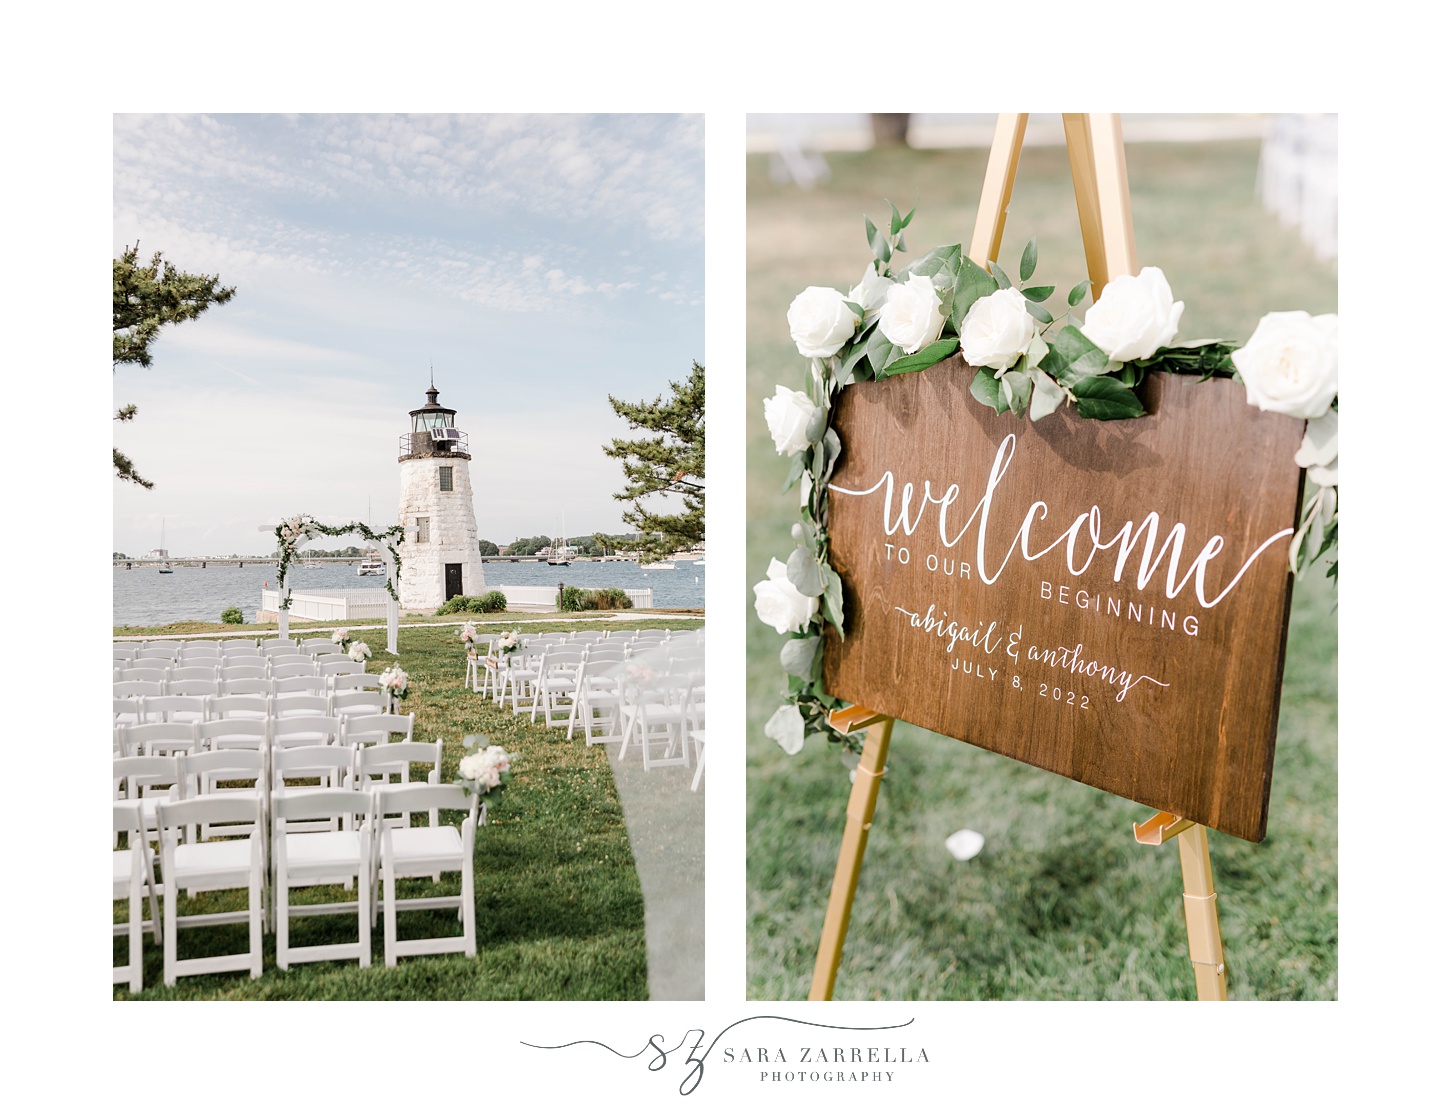 Gurney’s Newport wedding ceremony details and welcome sign